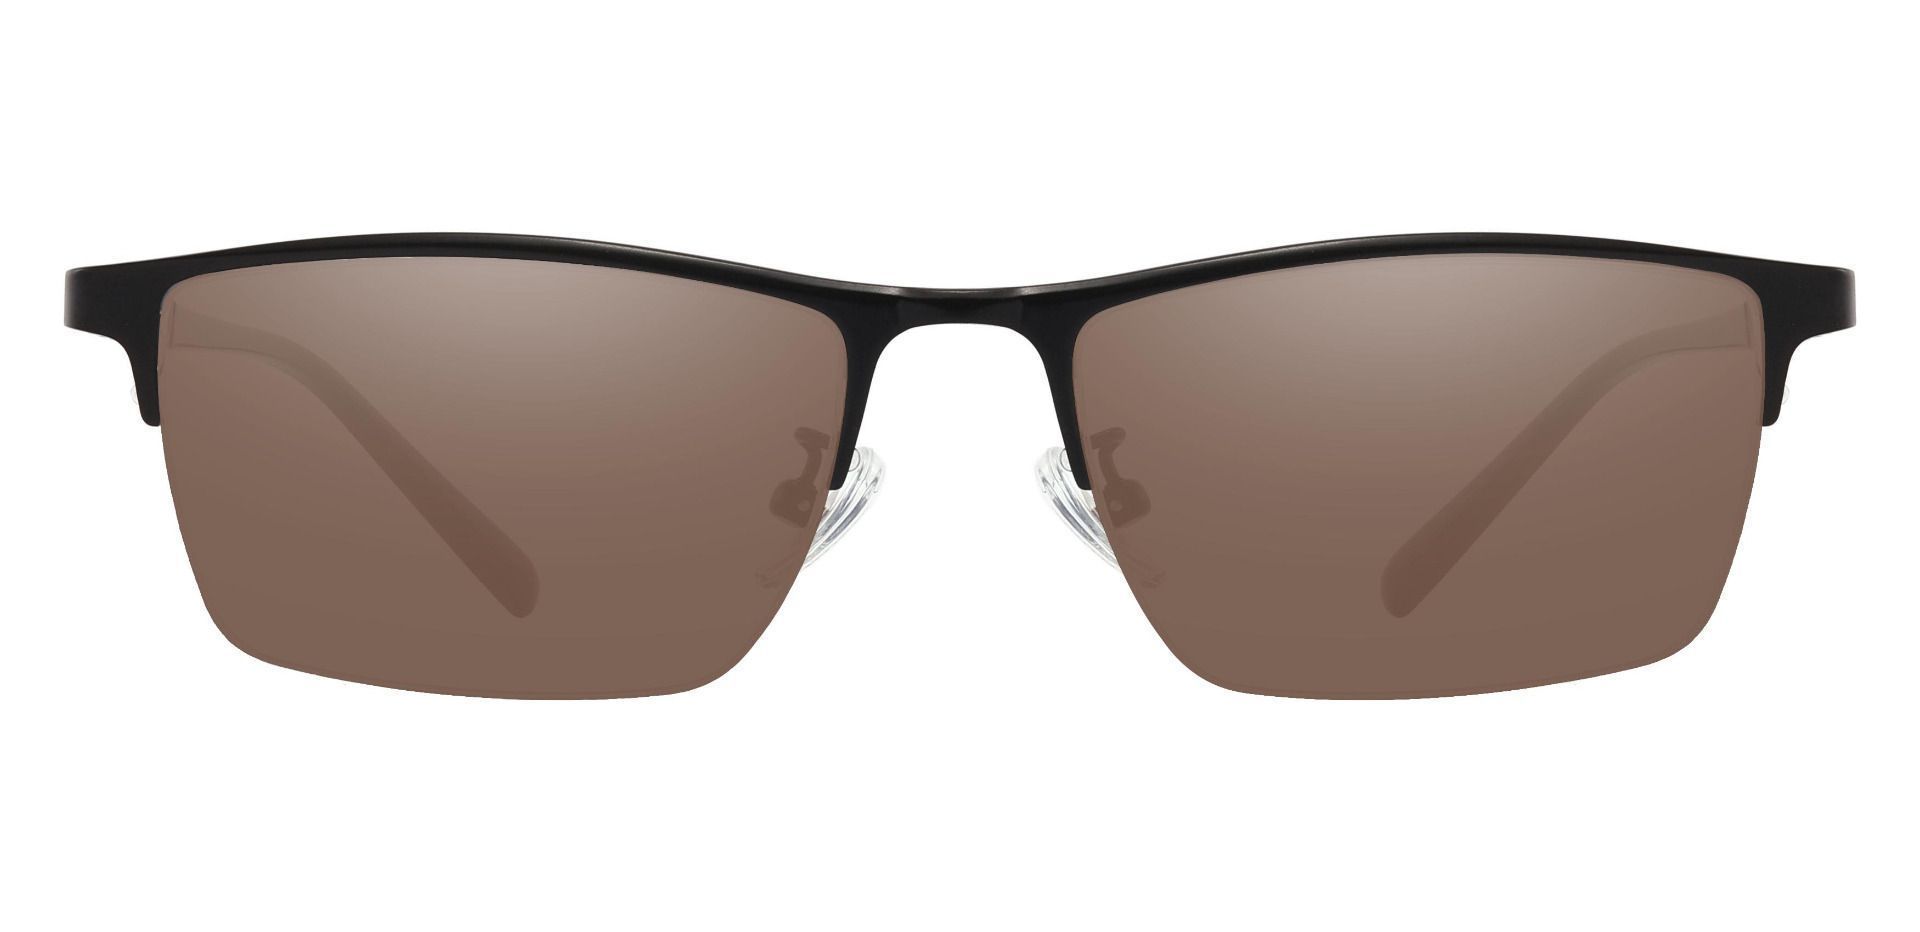 Maine Rectangle Non-Rx Sunglasses - Black Frame With Brown Lenses